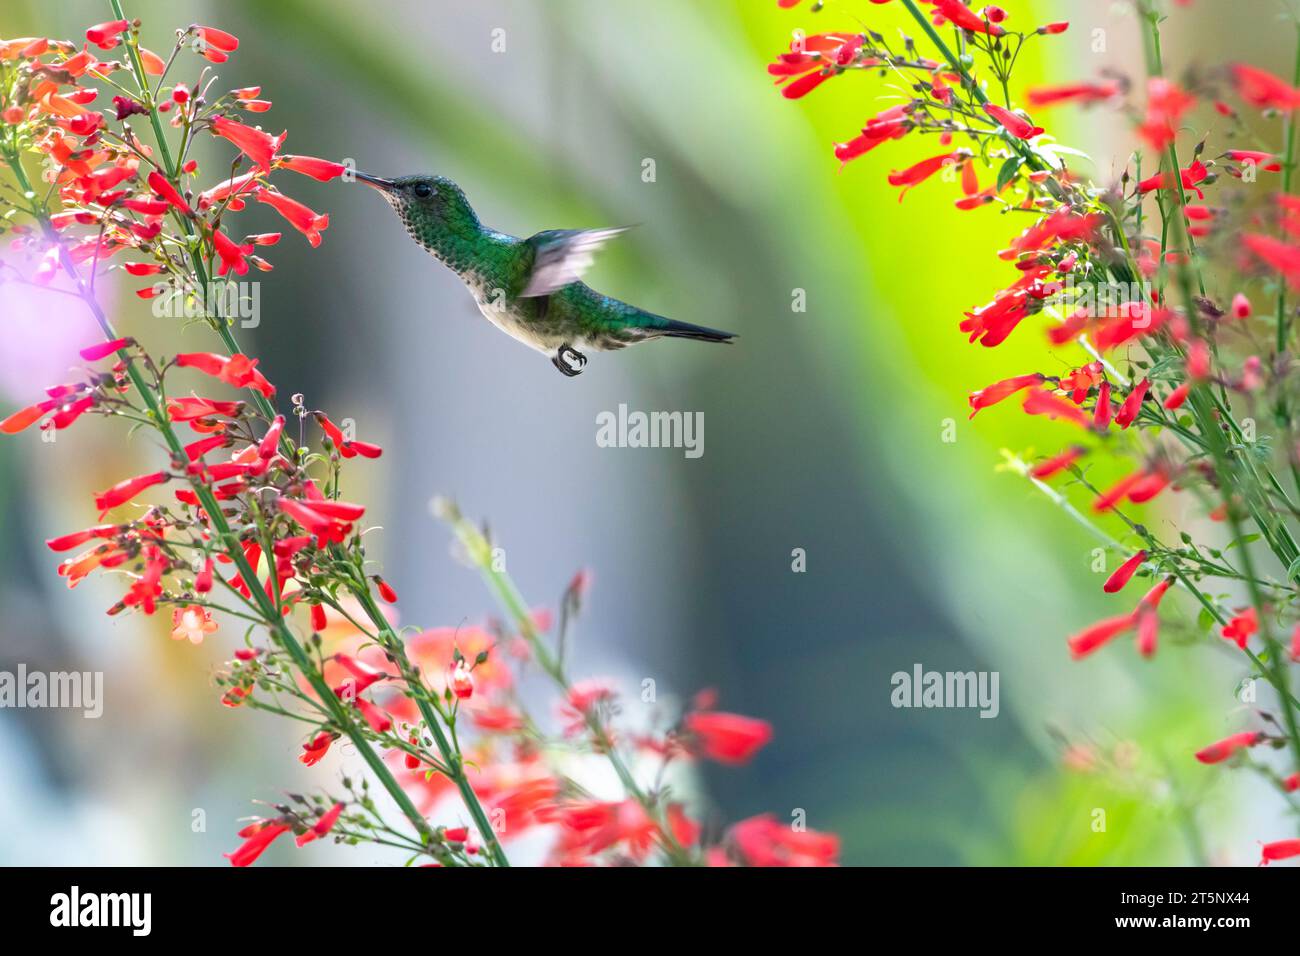 Colorful photo of a Blue-chinned Sapphire hummingbird, Chlorestes notata, pollinating red flowers Stock Photo